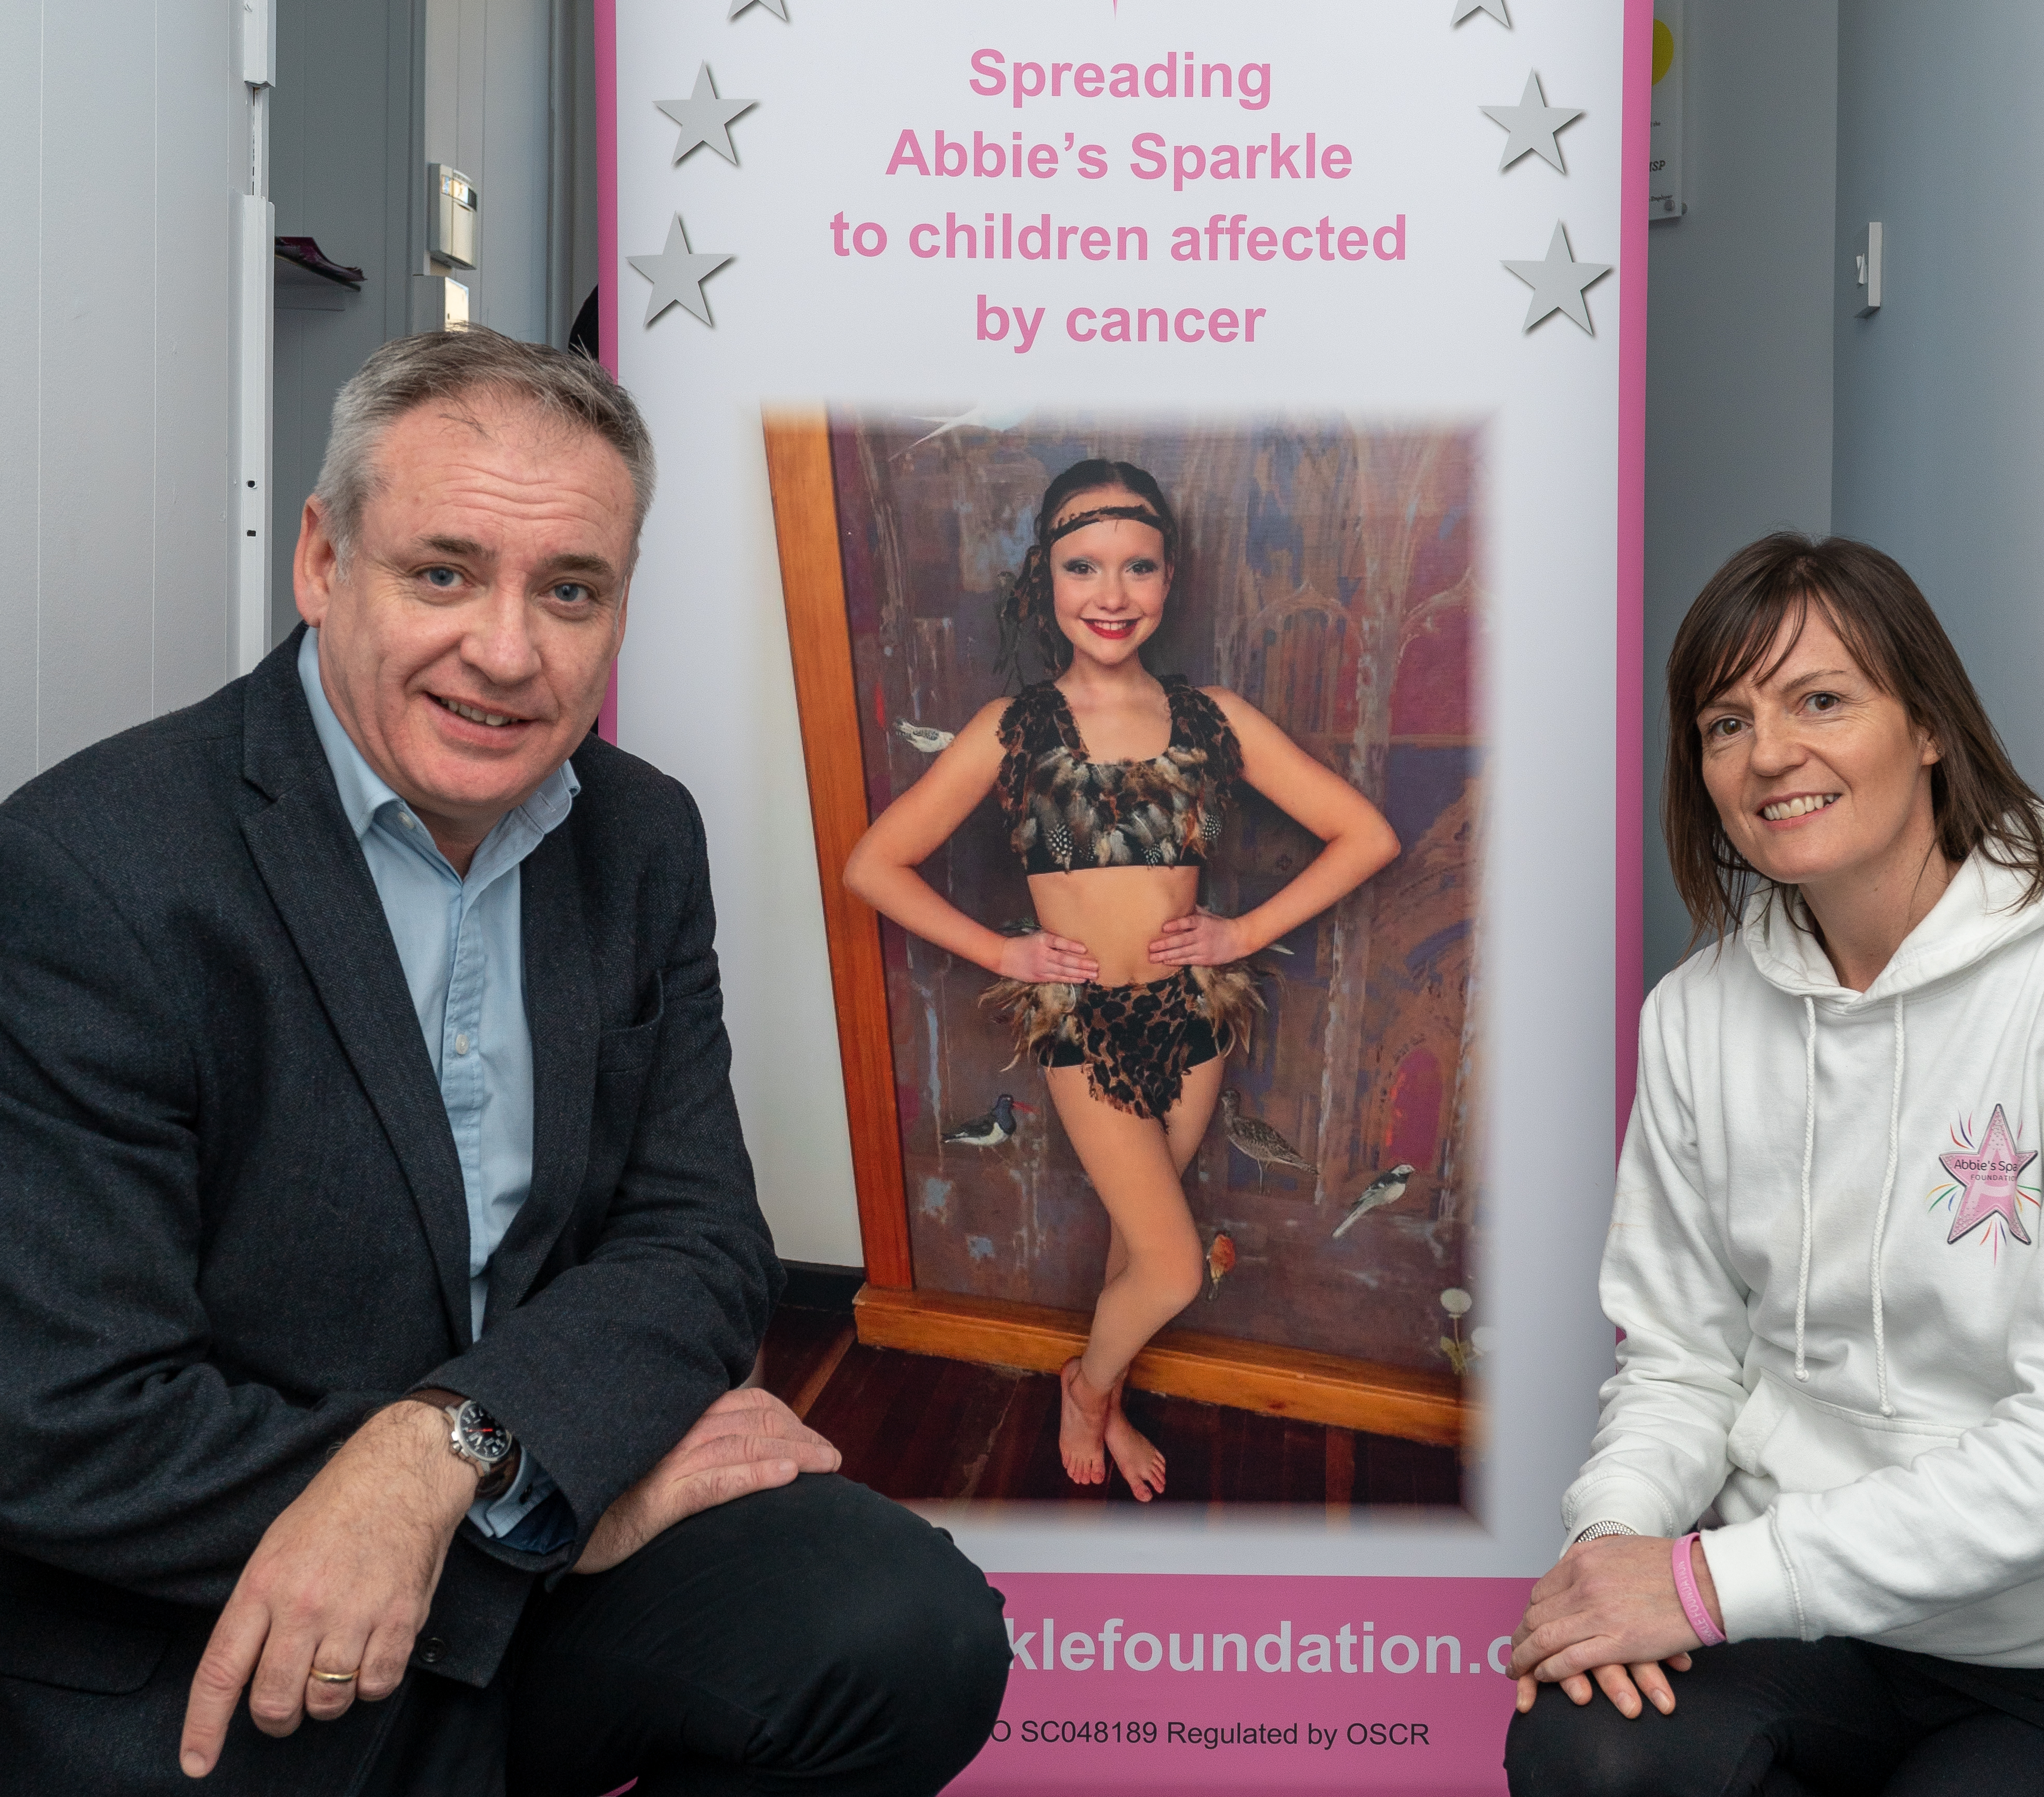 Moray MSP Richard Lochhead and Abbie's mum, Tammy Main, launch the competition to design a Christmas card to support Abbie's Sparkle Foundation.